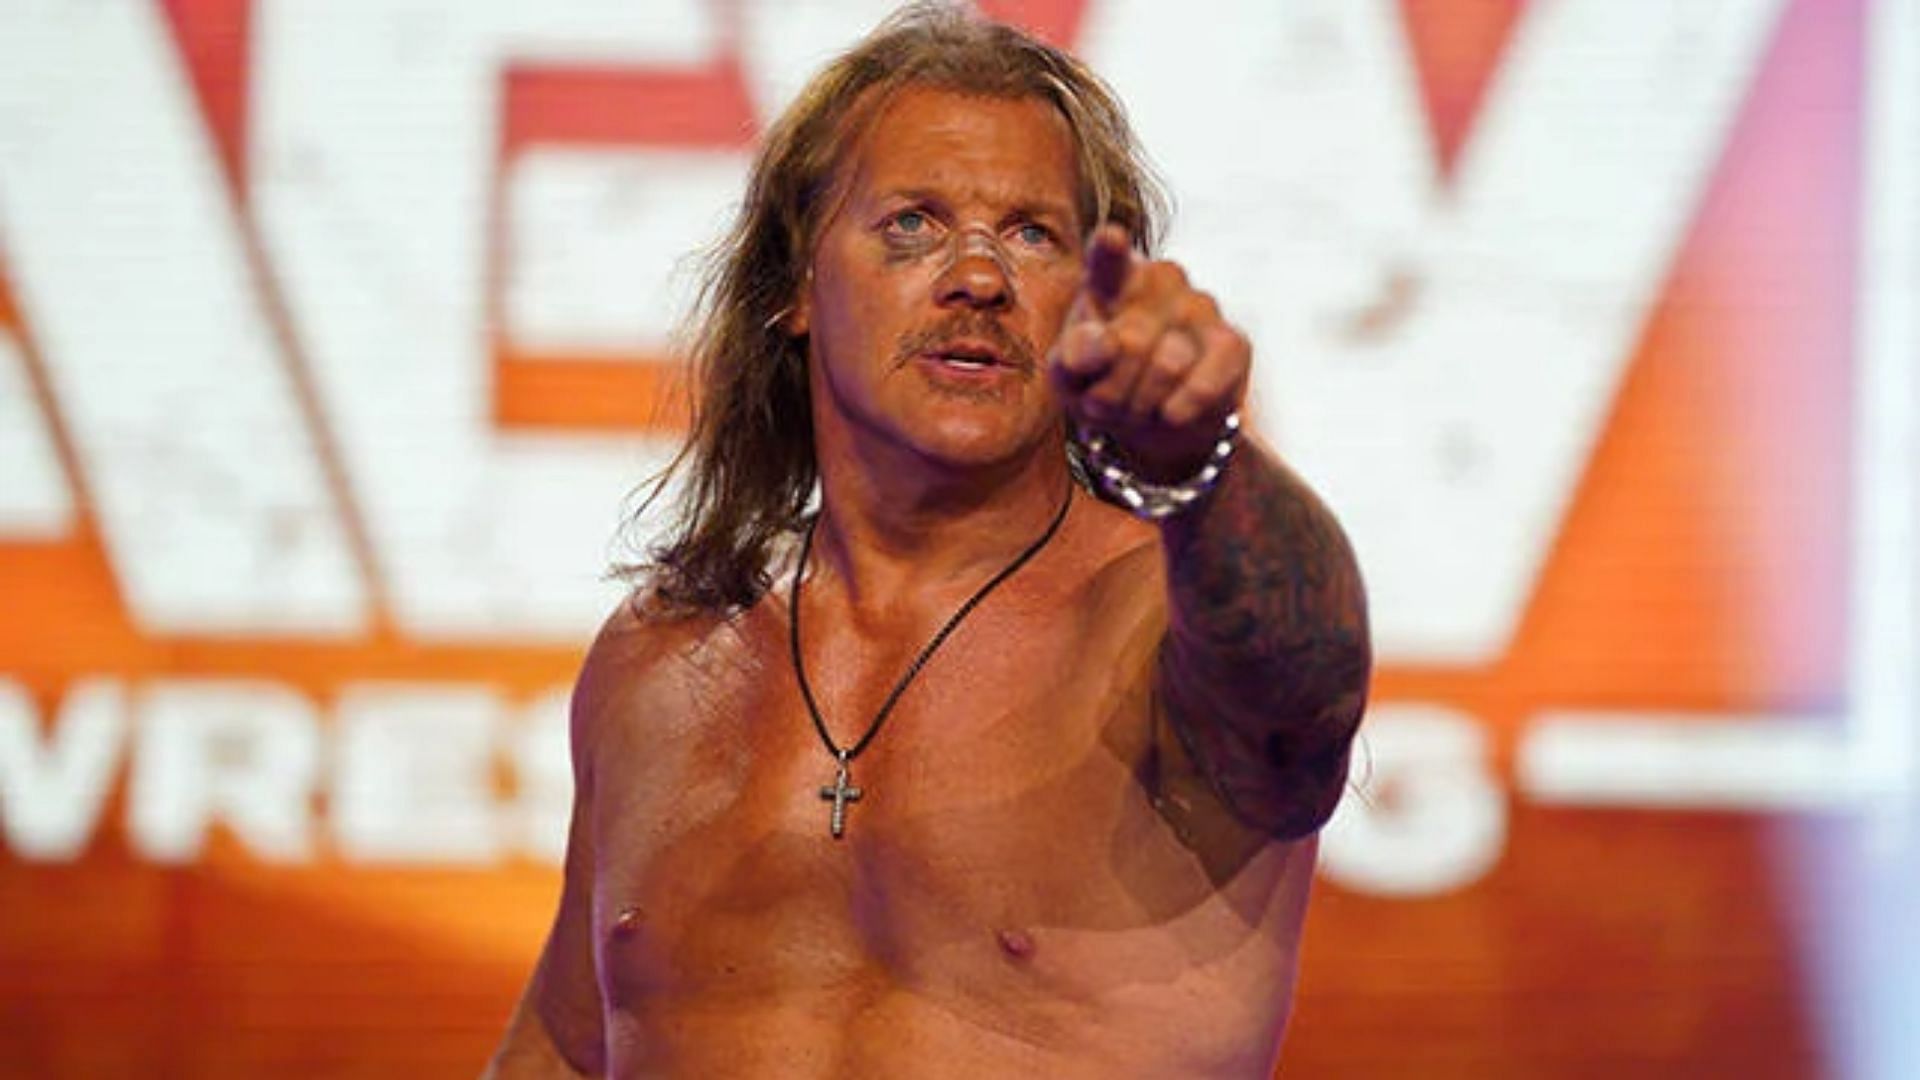 Chris Jericho will challenge for the Interim title this week on Dynamite